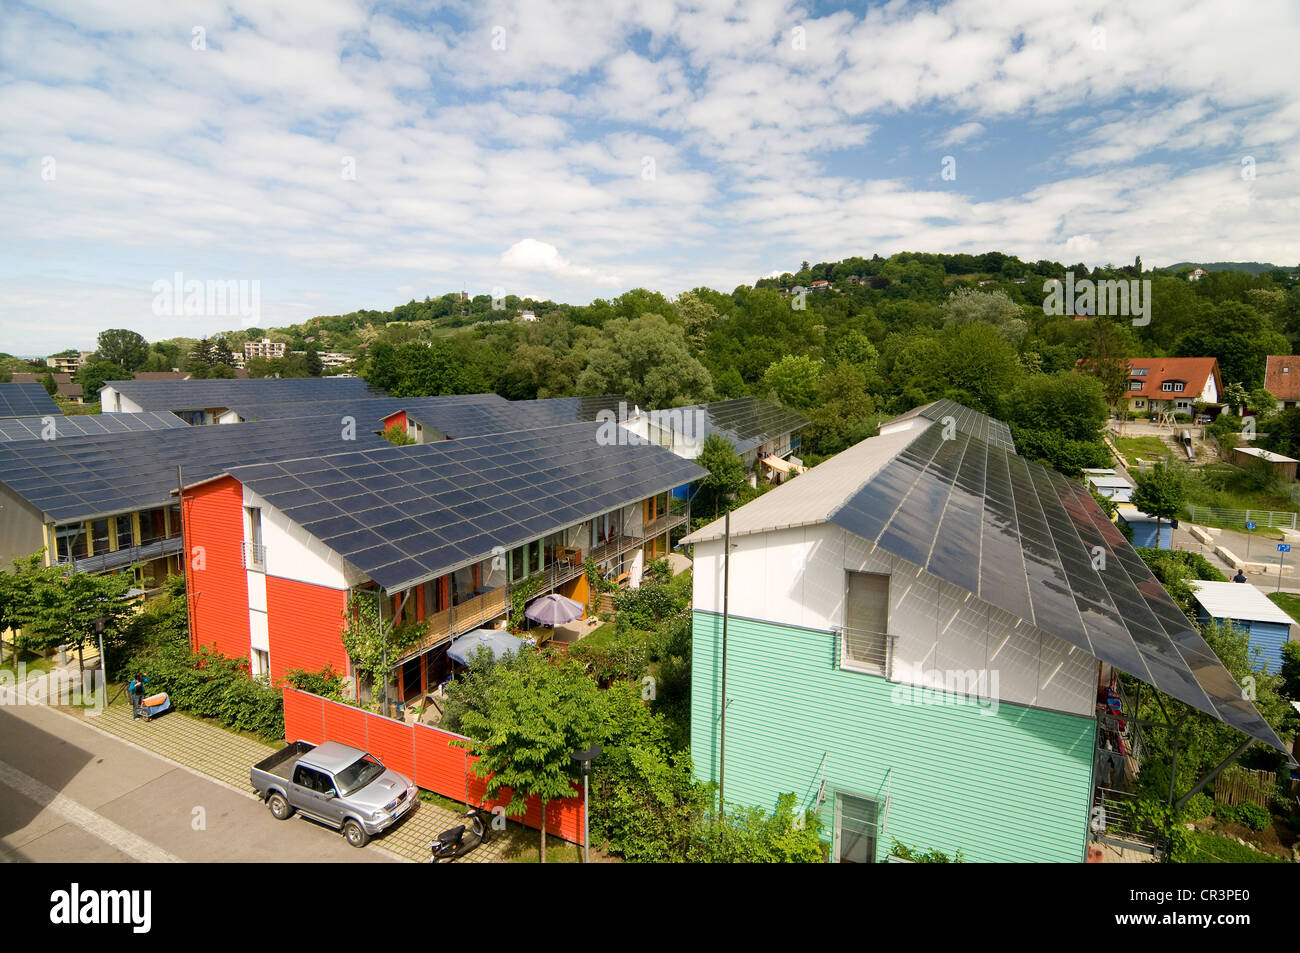 Passive solar houses with solar collectors on the roofs, by architect Rolf Disch, Vauban district, Freiburg im Breisgau Stock Photo